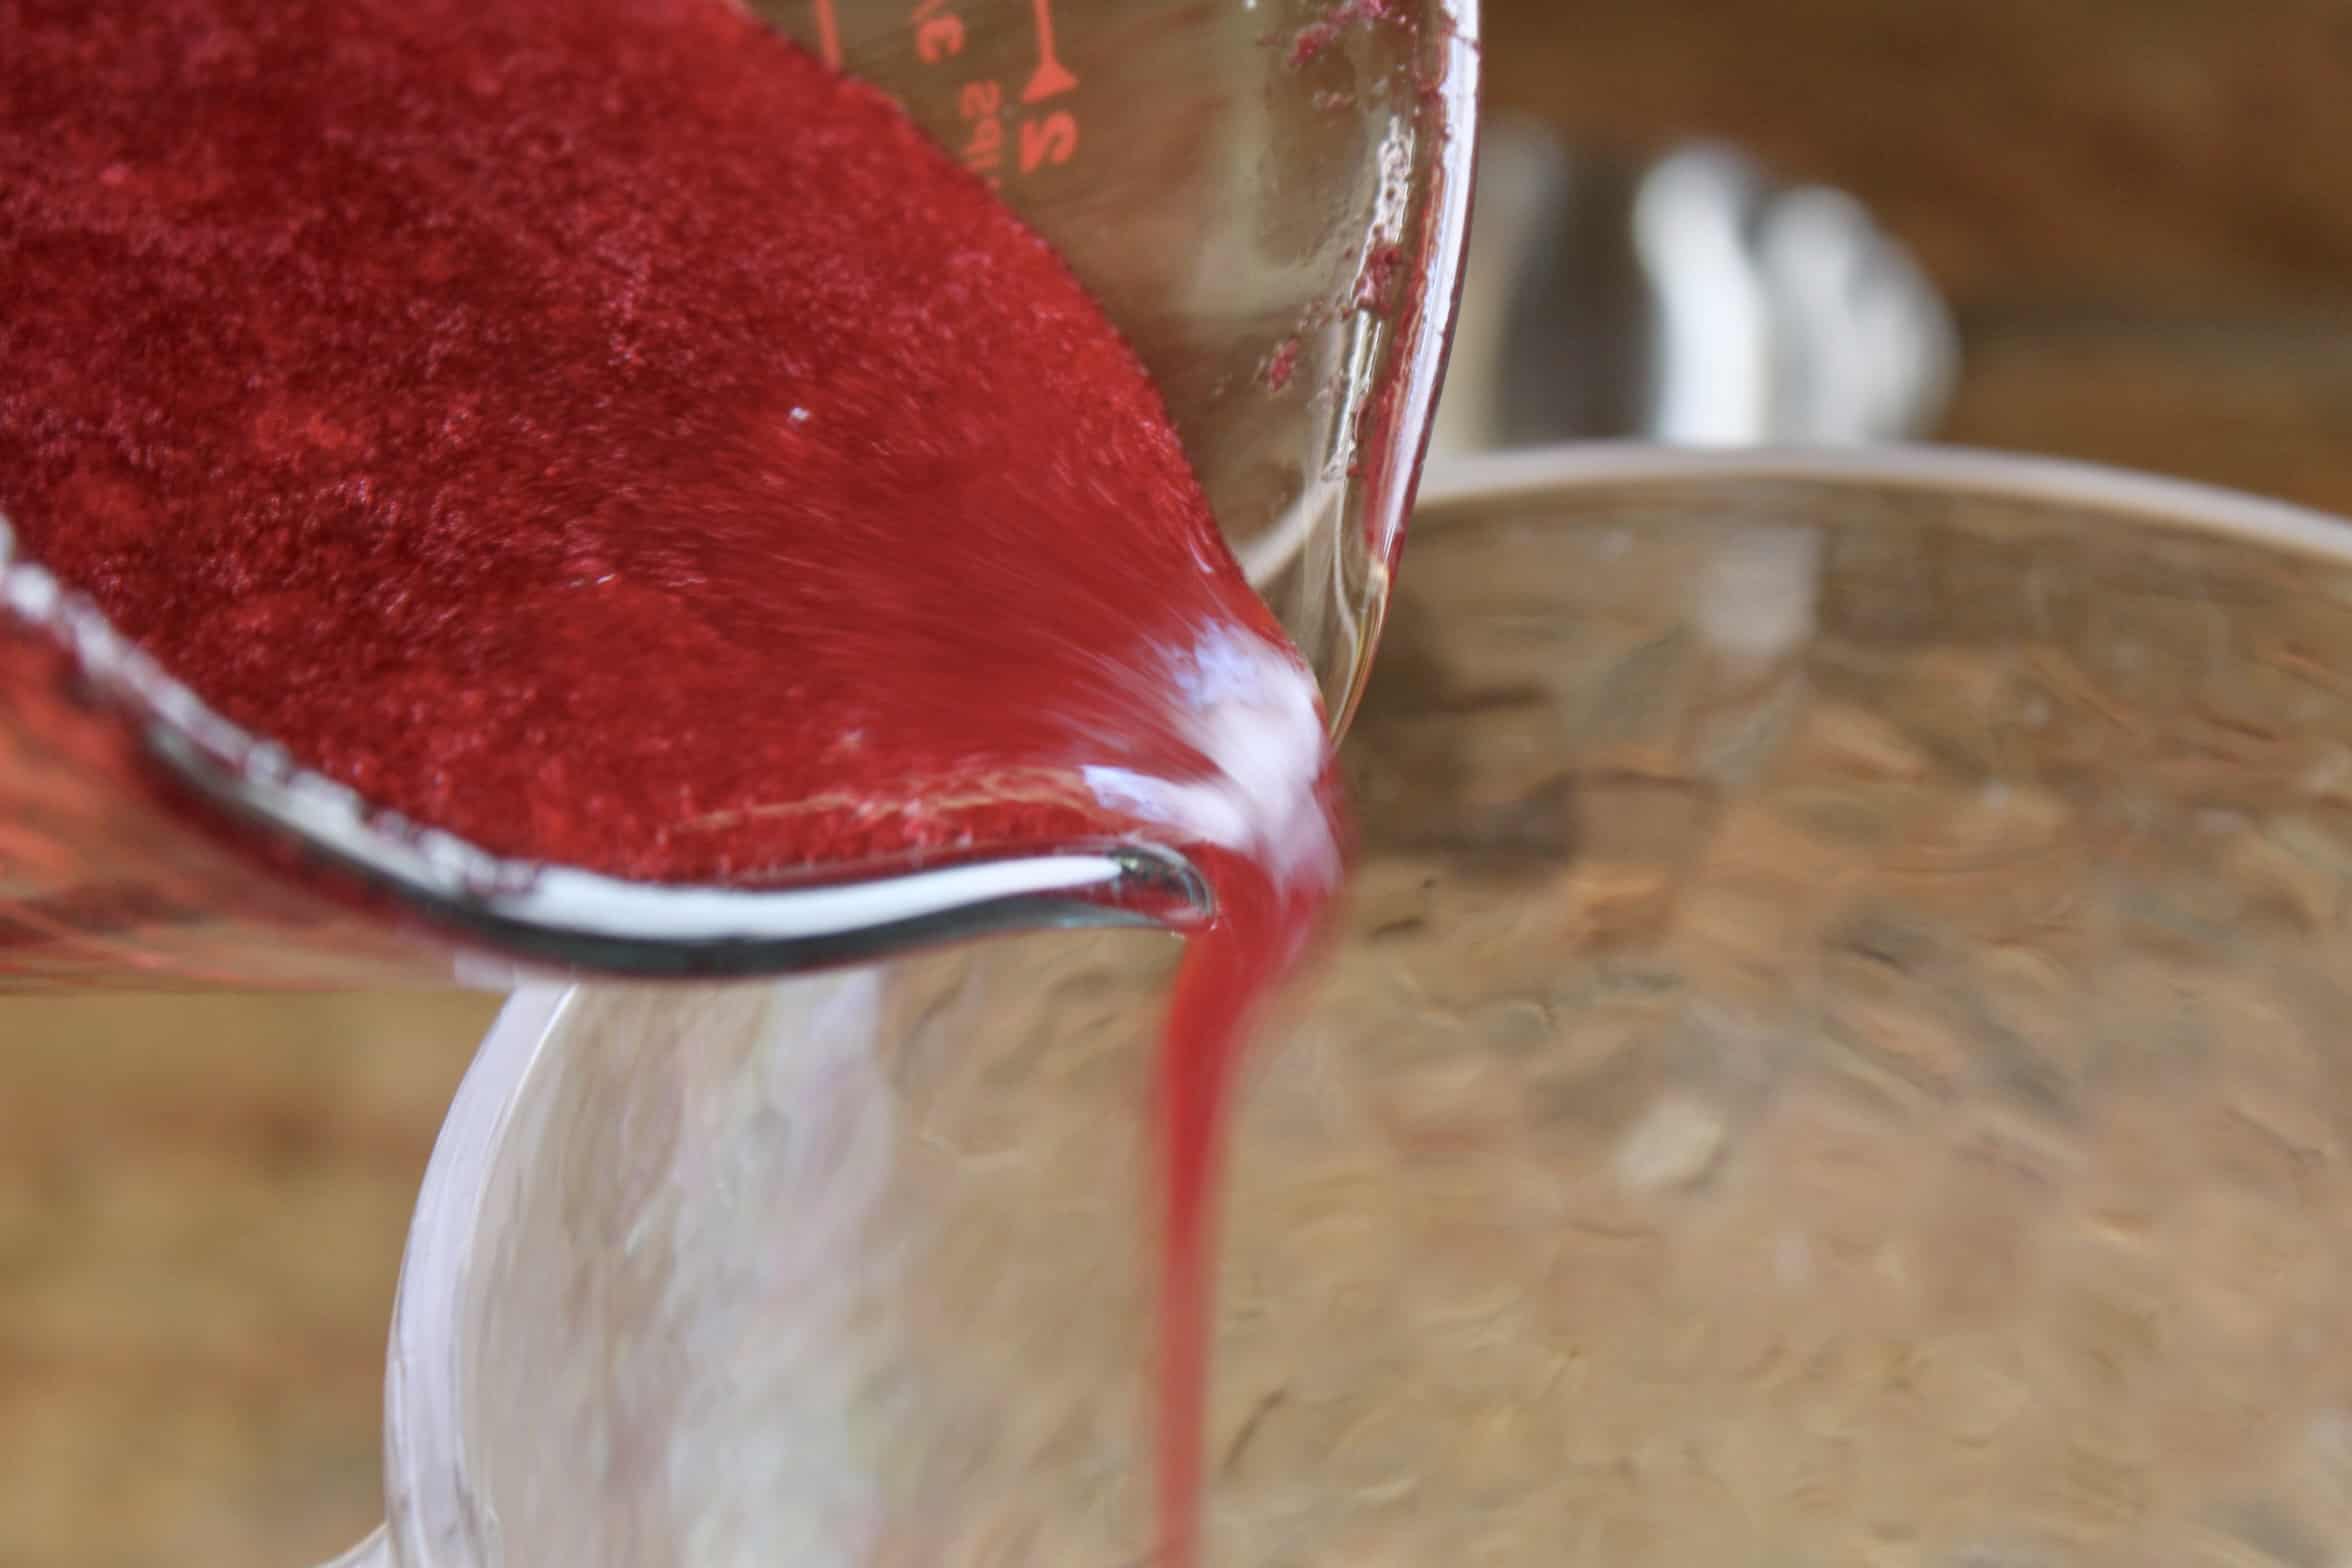 pouring cranberry syrup